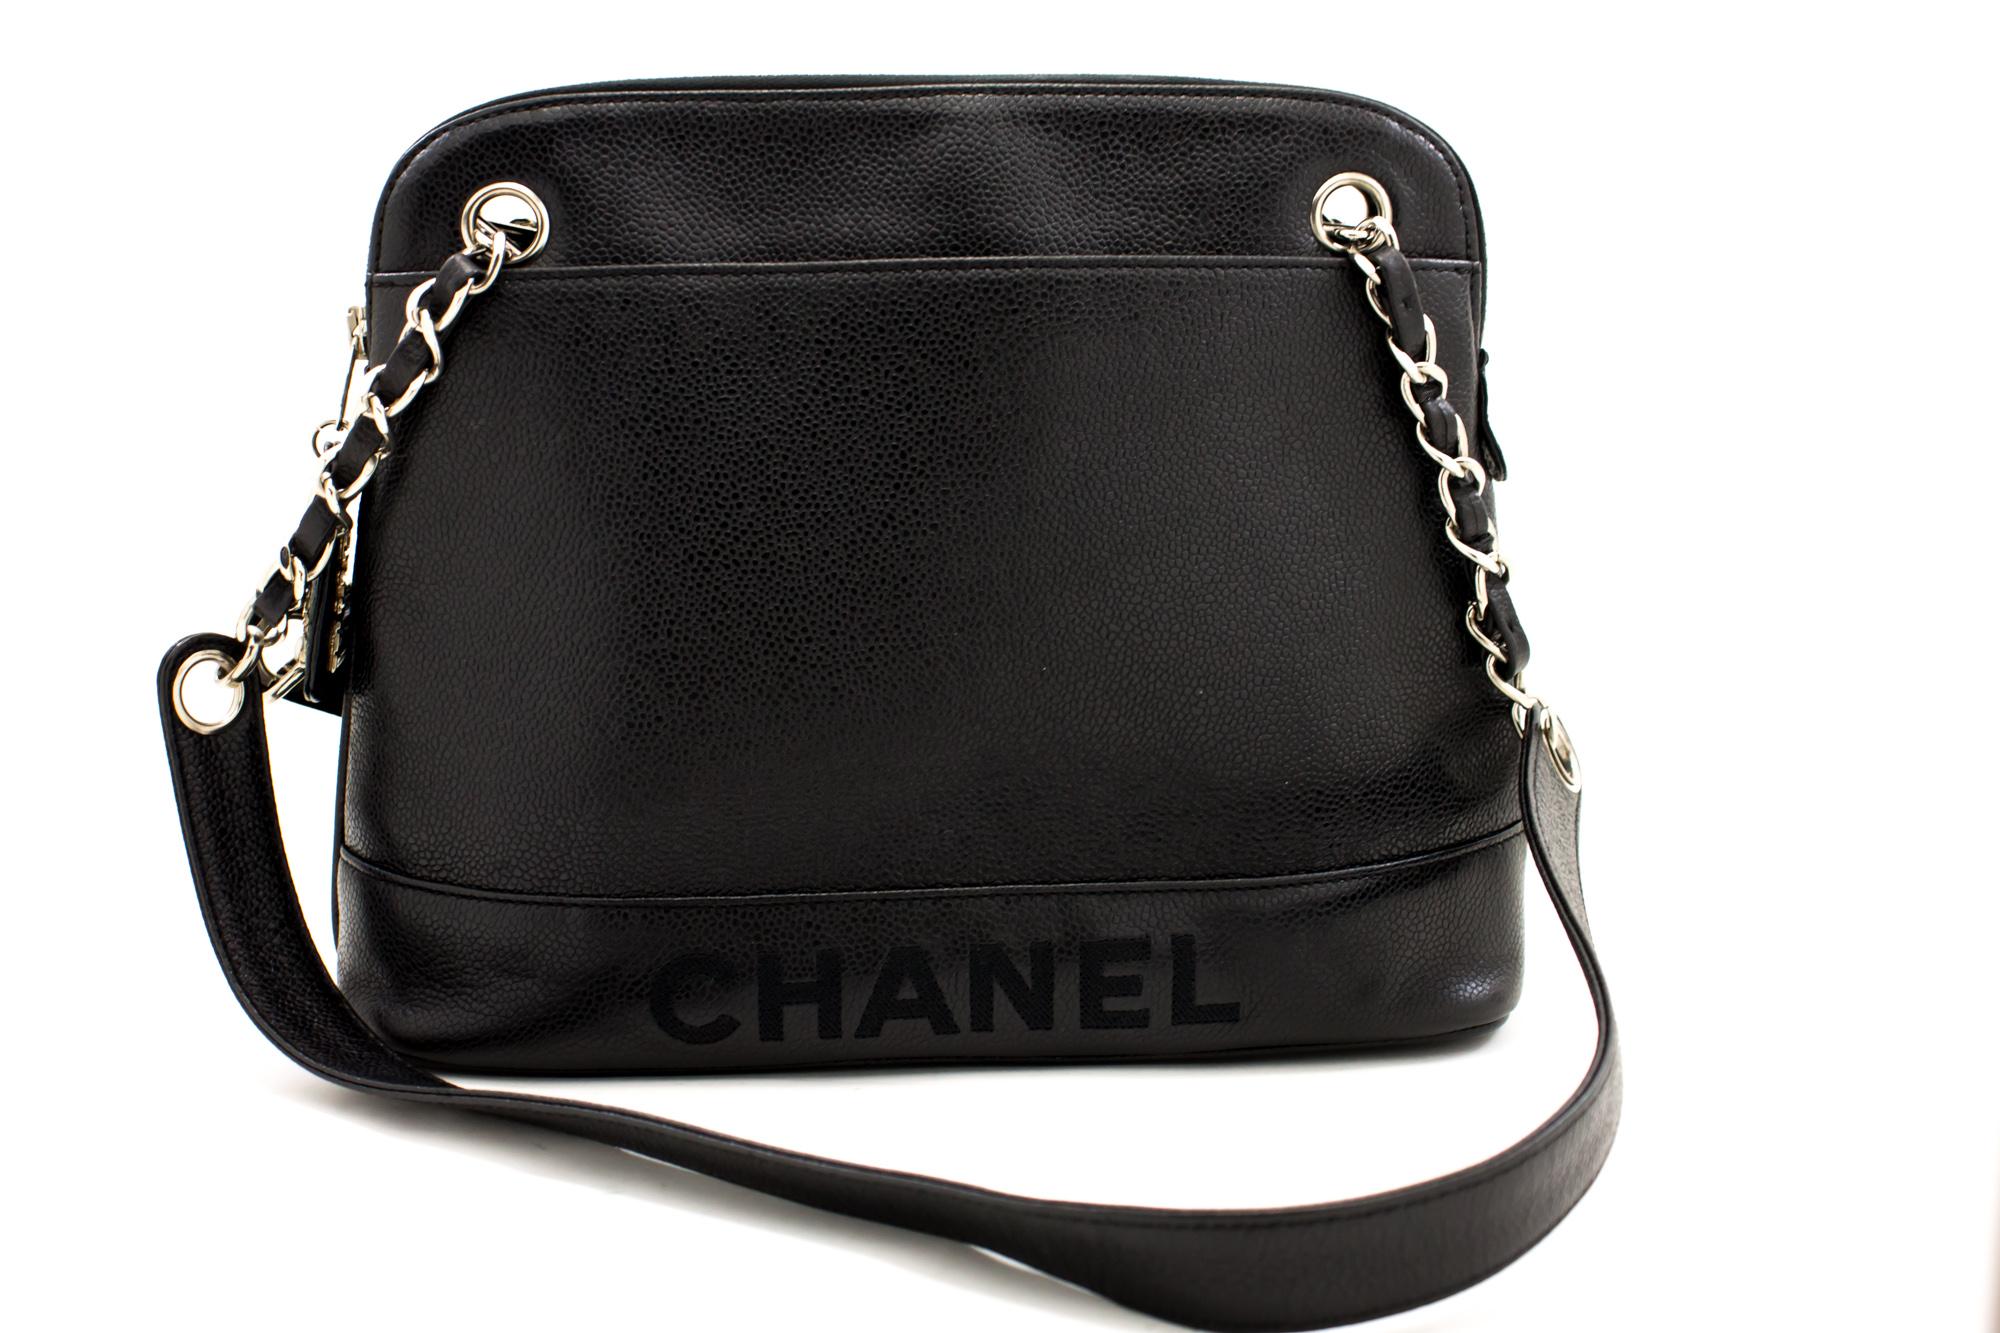 An authentic CHANEL Caviar Logo Chain Shoulder Bag Black Leather Silver Hardwar. The color is Black. The outside material is Leather. The pattern is Solid. This item is Vintage / Classic. The year of manufacture would be 1996-1997.
Conditions &